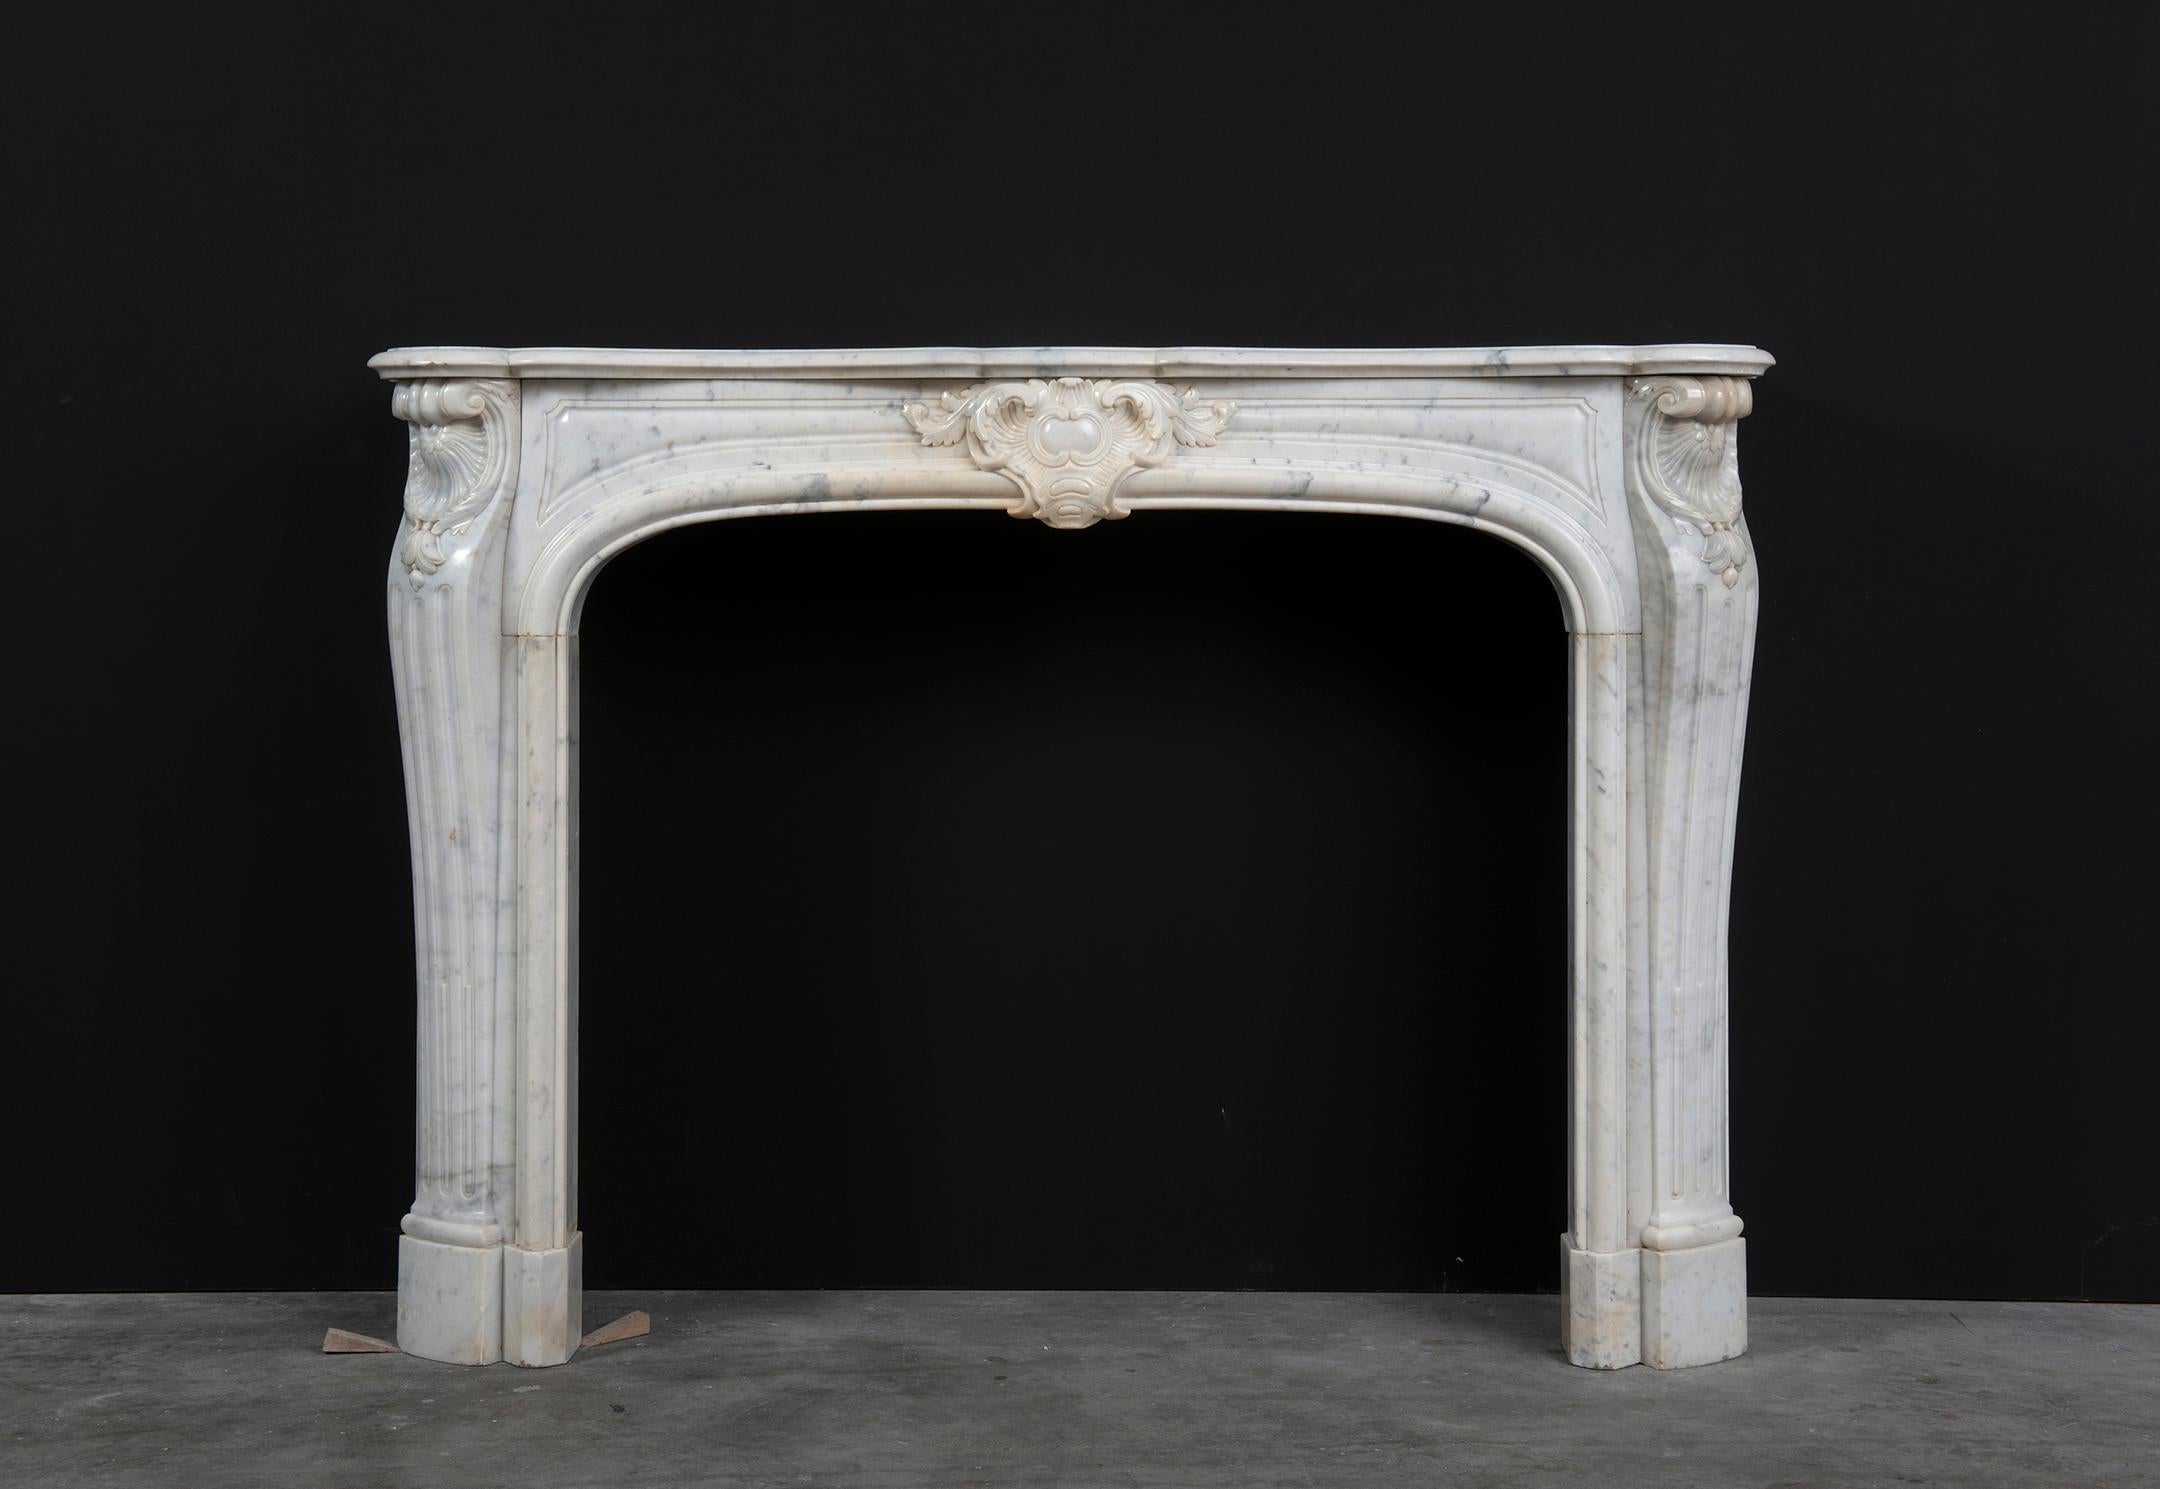 Antique Louis XV fireplace mantel in Carrara white marble.
Beautiful Antique Louis XV fireplace mantel.

Very fine carved early 19th century Louis XV mantelpiece from Paris.
Beautiful decorative piece, nice proportioned.


The serpentine